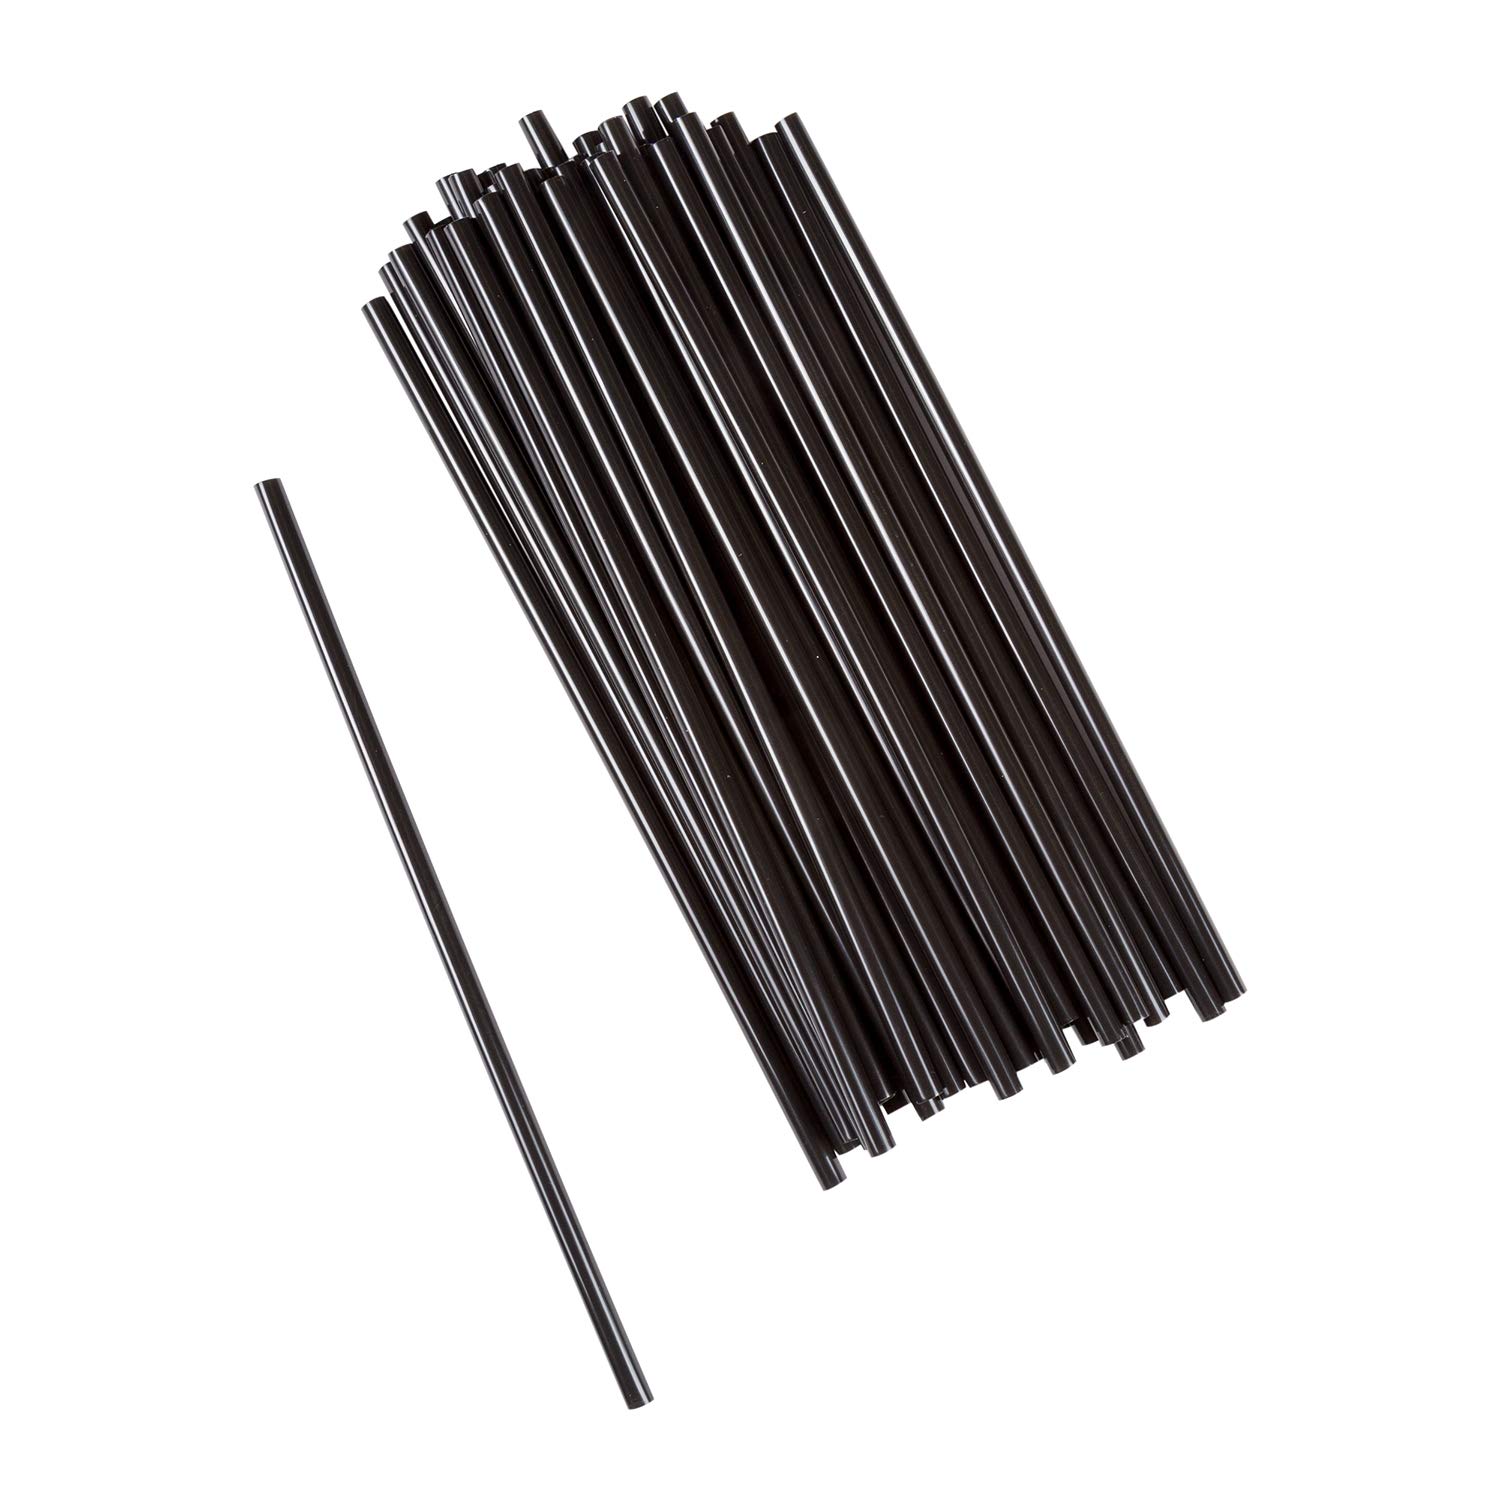 AmerCare 7.75 Inch Jumbo Black Straws, Unwrapped, Case of 12,000